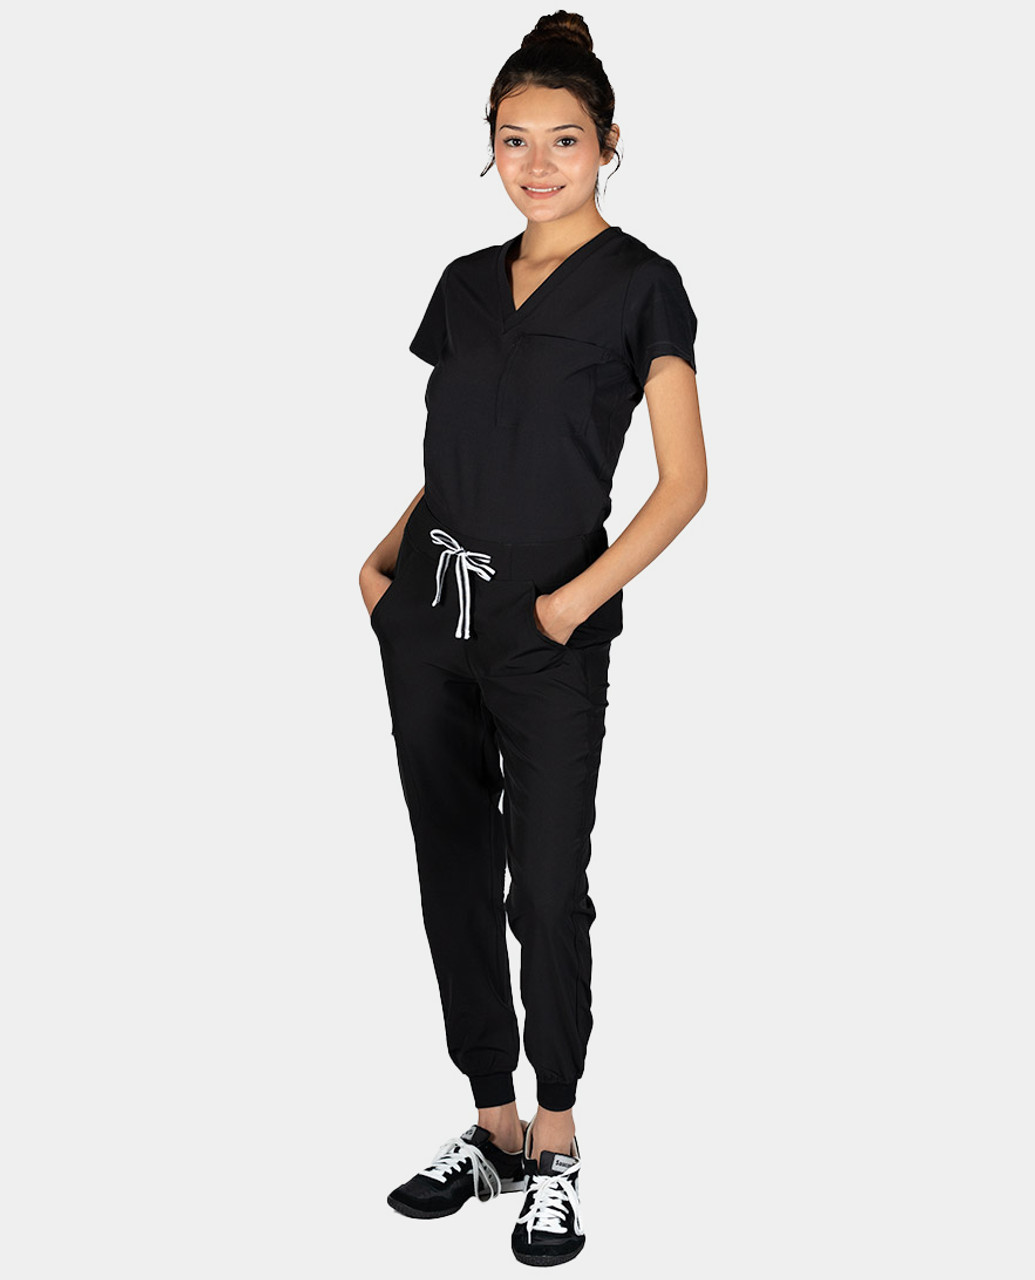 Buy ONLY Black Womens 6 Pocket Solid Joggers Pants